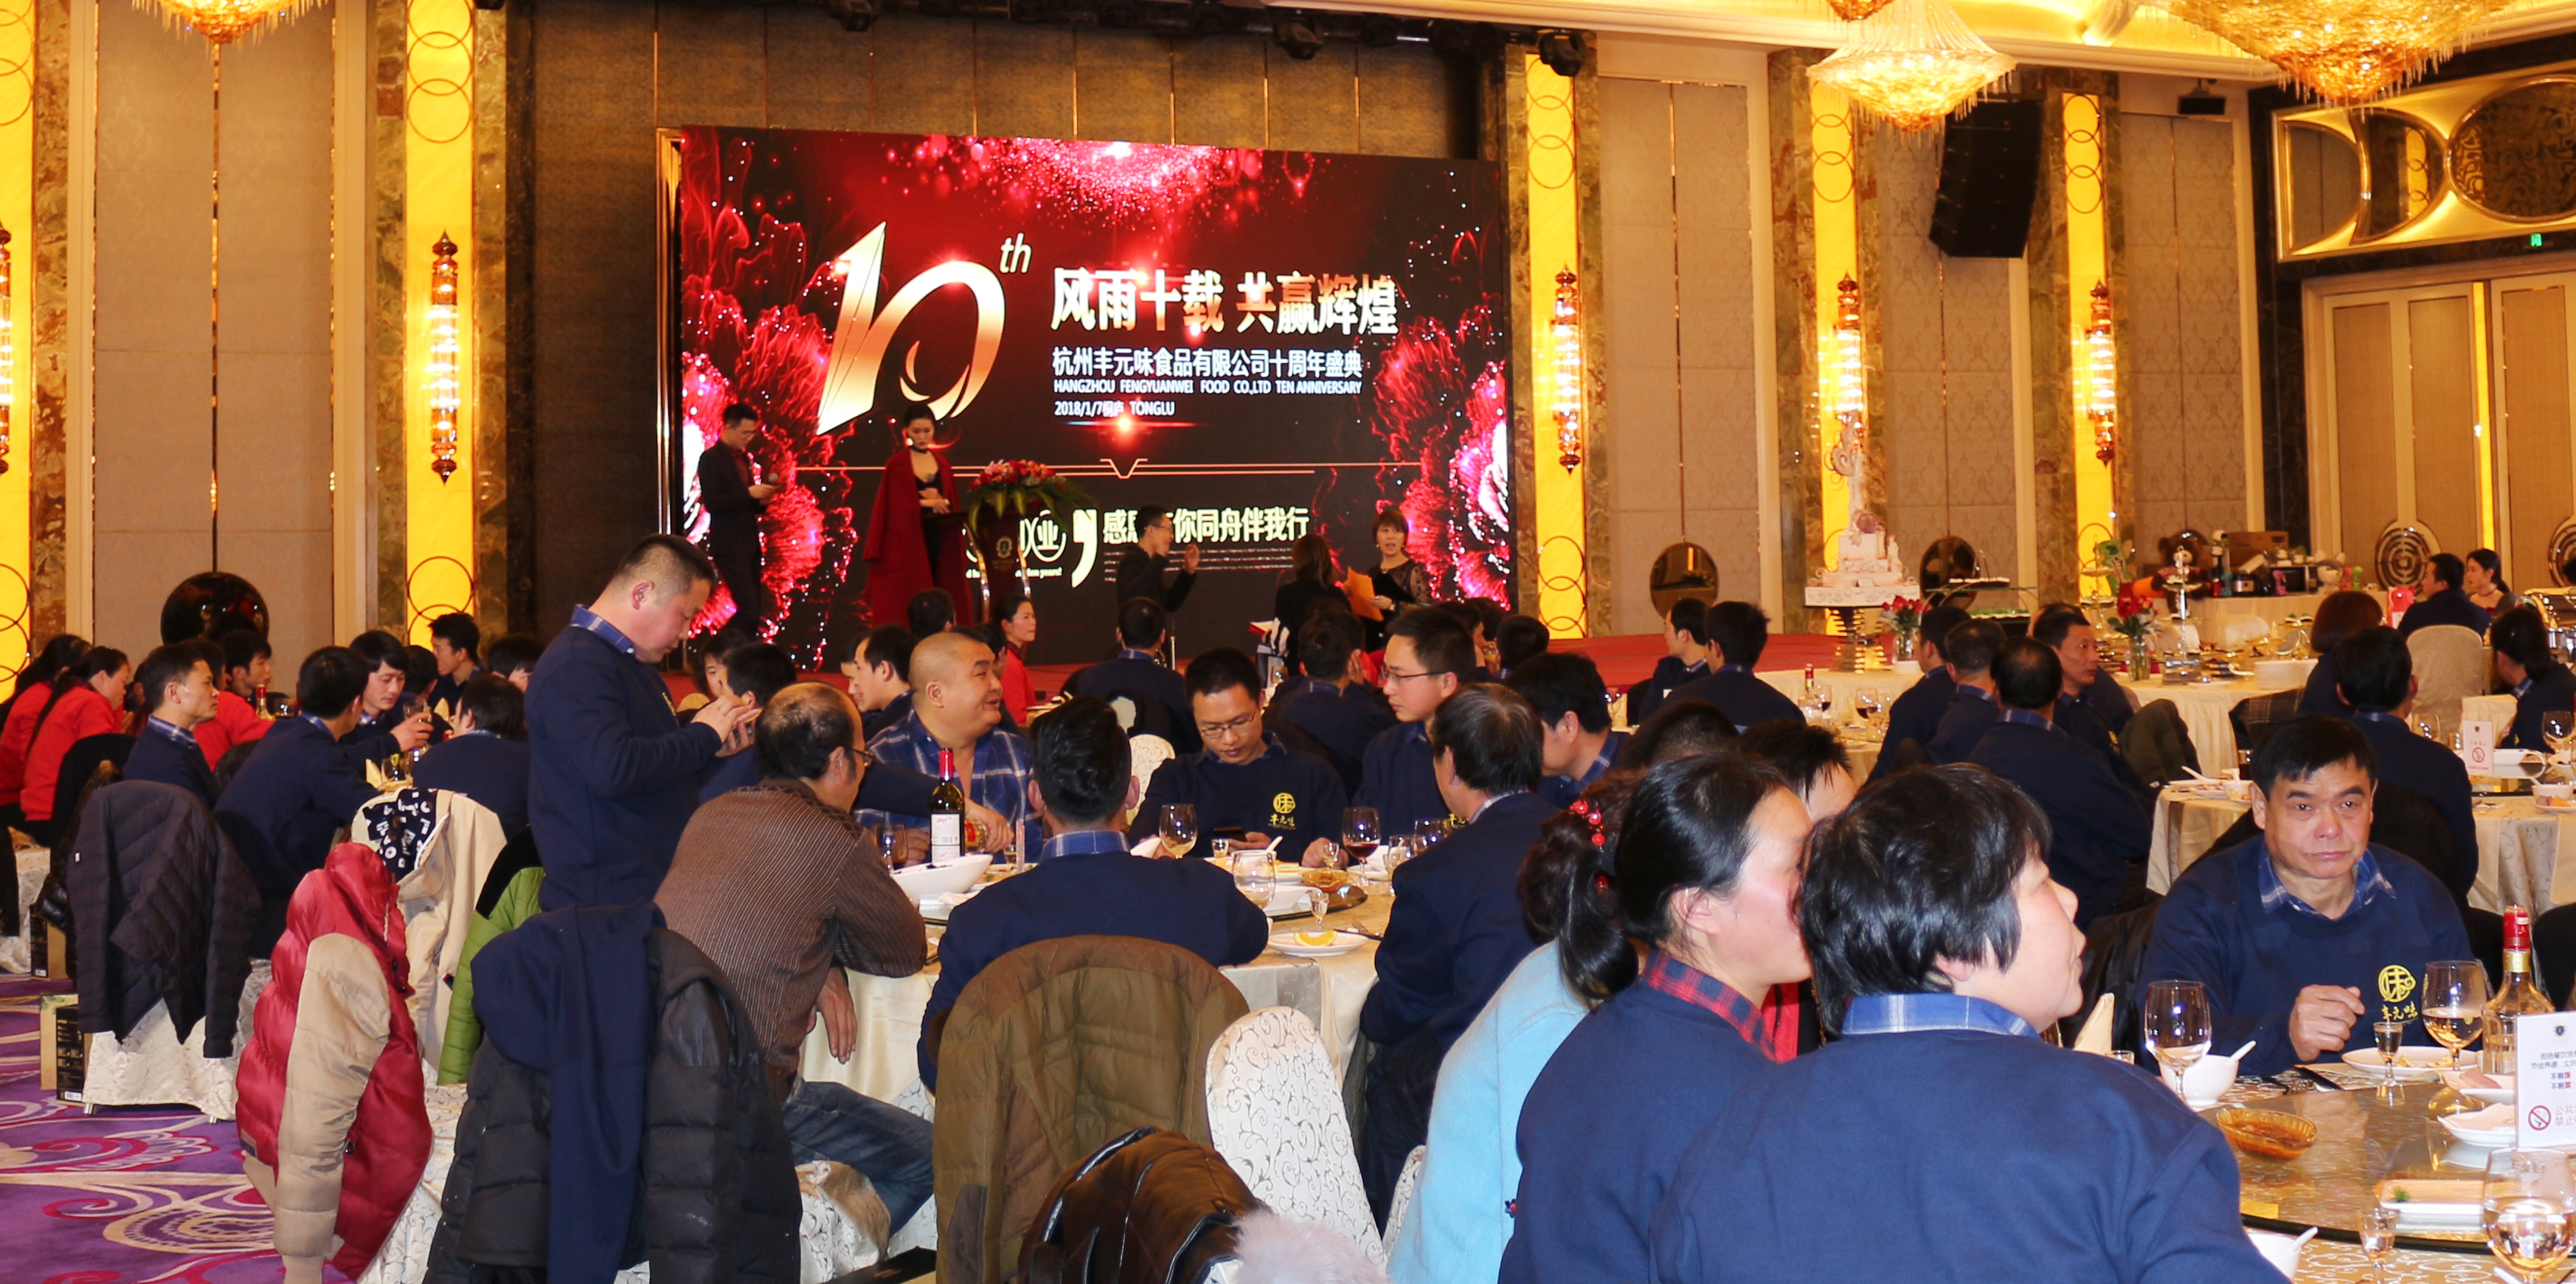 Fengyuanwei "10th Anniversary Celebration of the Big Family"